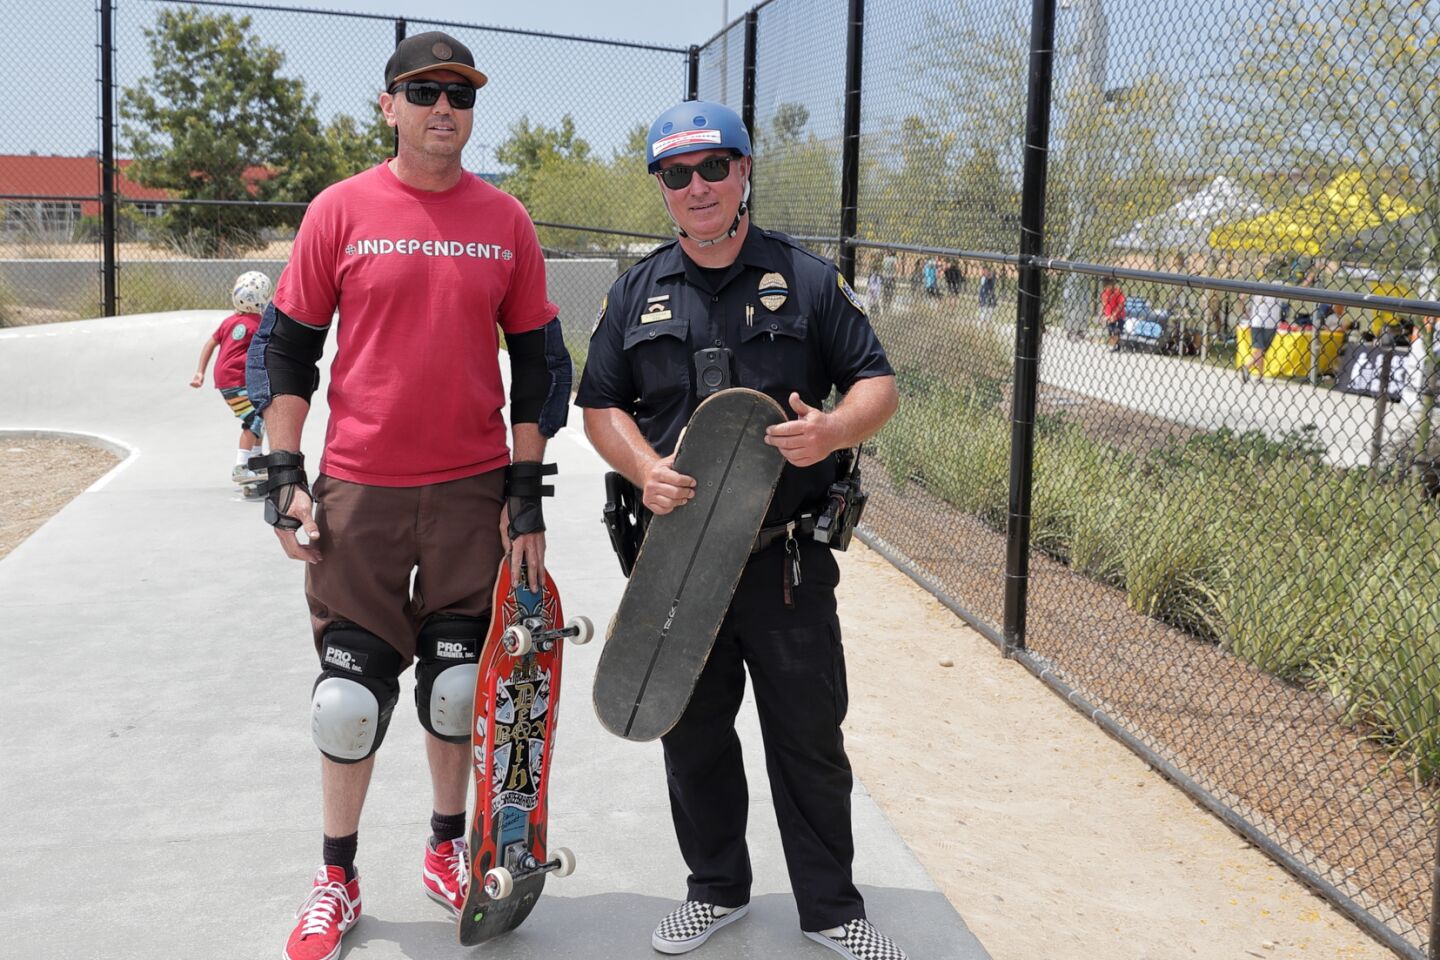 Cory Devinenport with SD police officer Chad Crenshaw